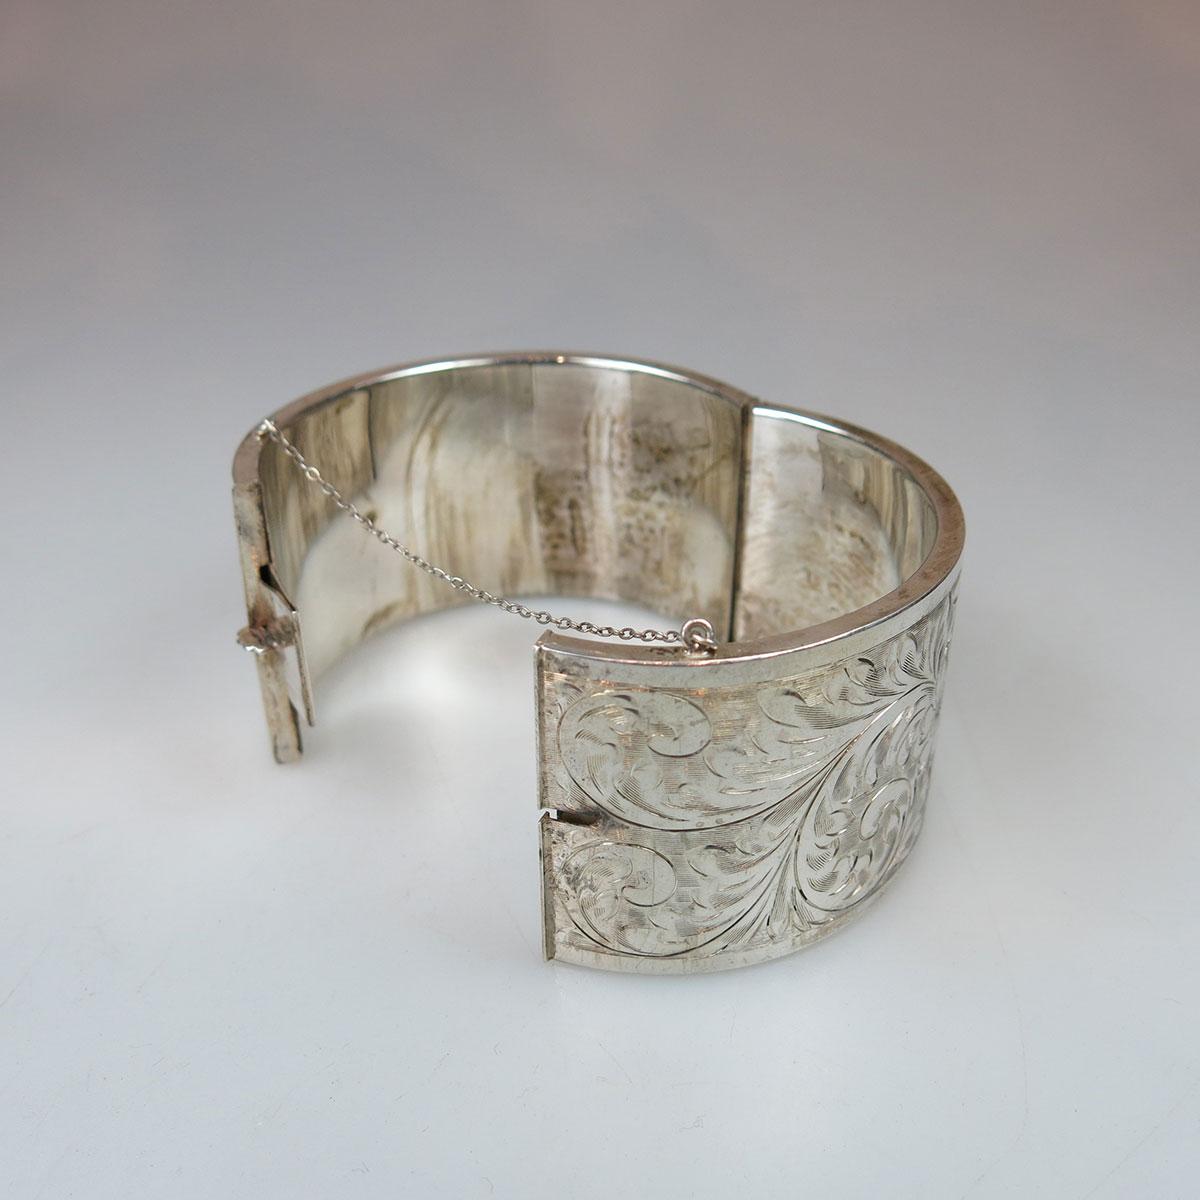 Forstner Canadian Sterling Silver Hinged Cuff Bangle